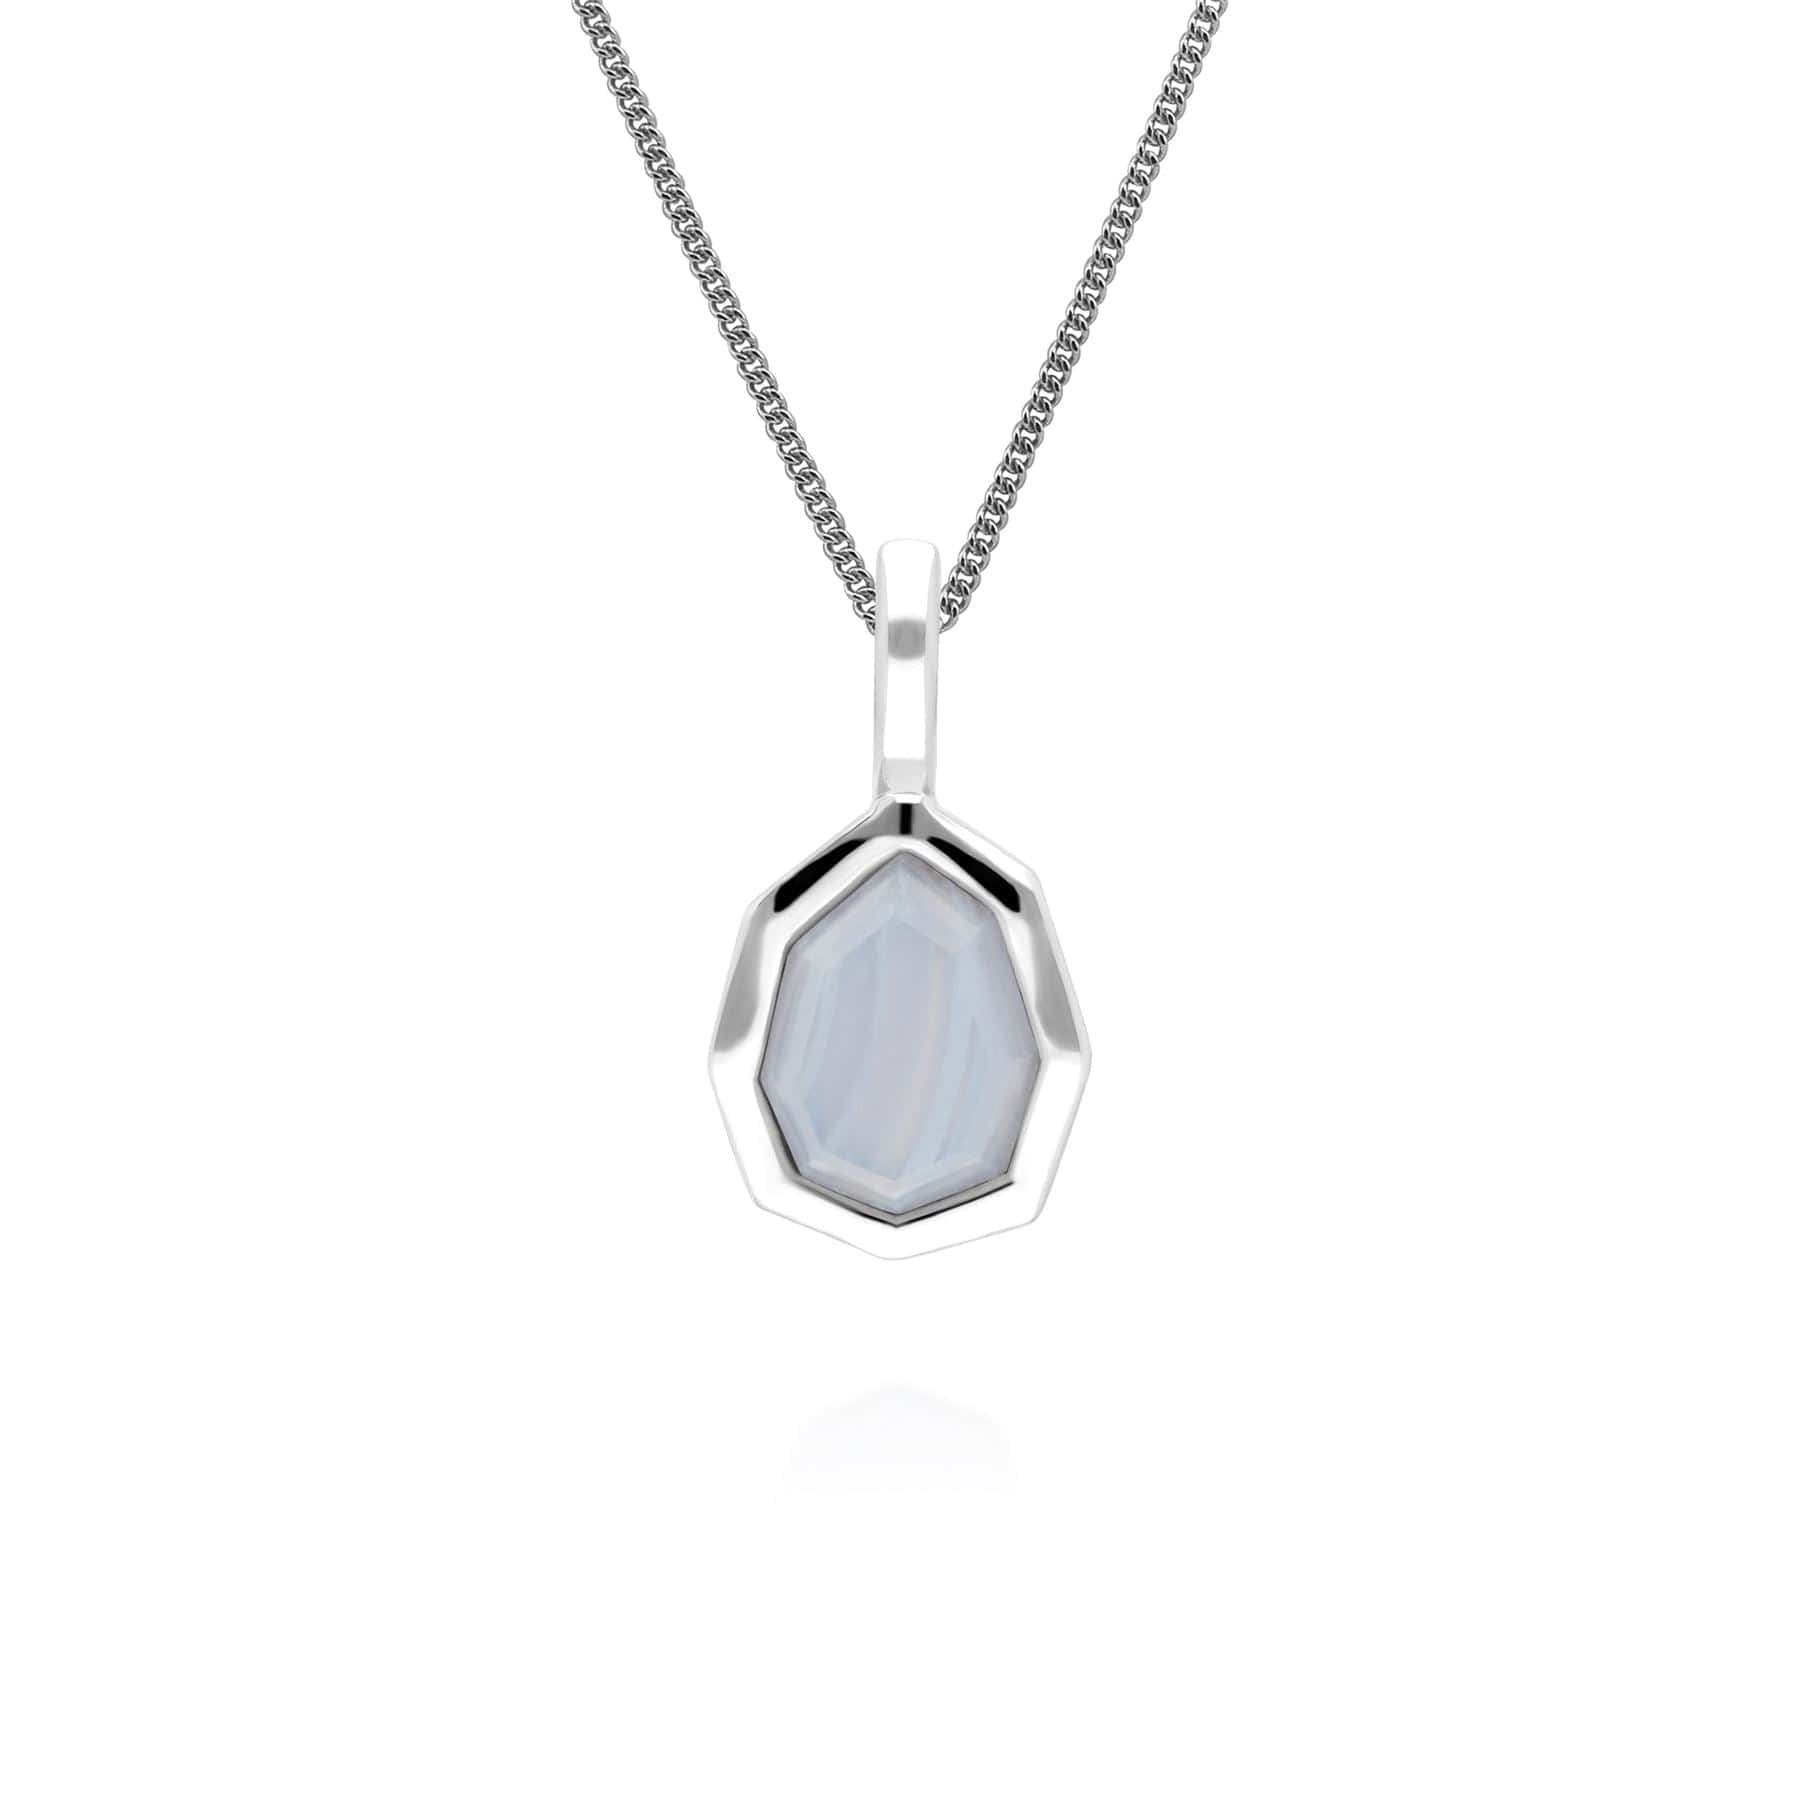 Photos - Pendant / Choker Necklace Irregular B Gem Blue Lace Agate Pendant in Sterling Silver